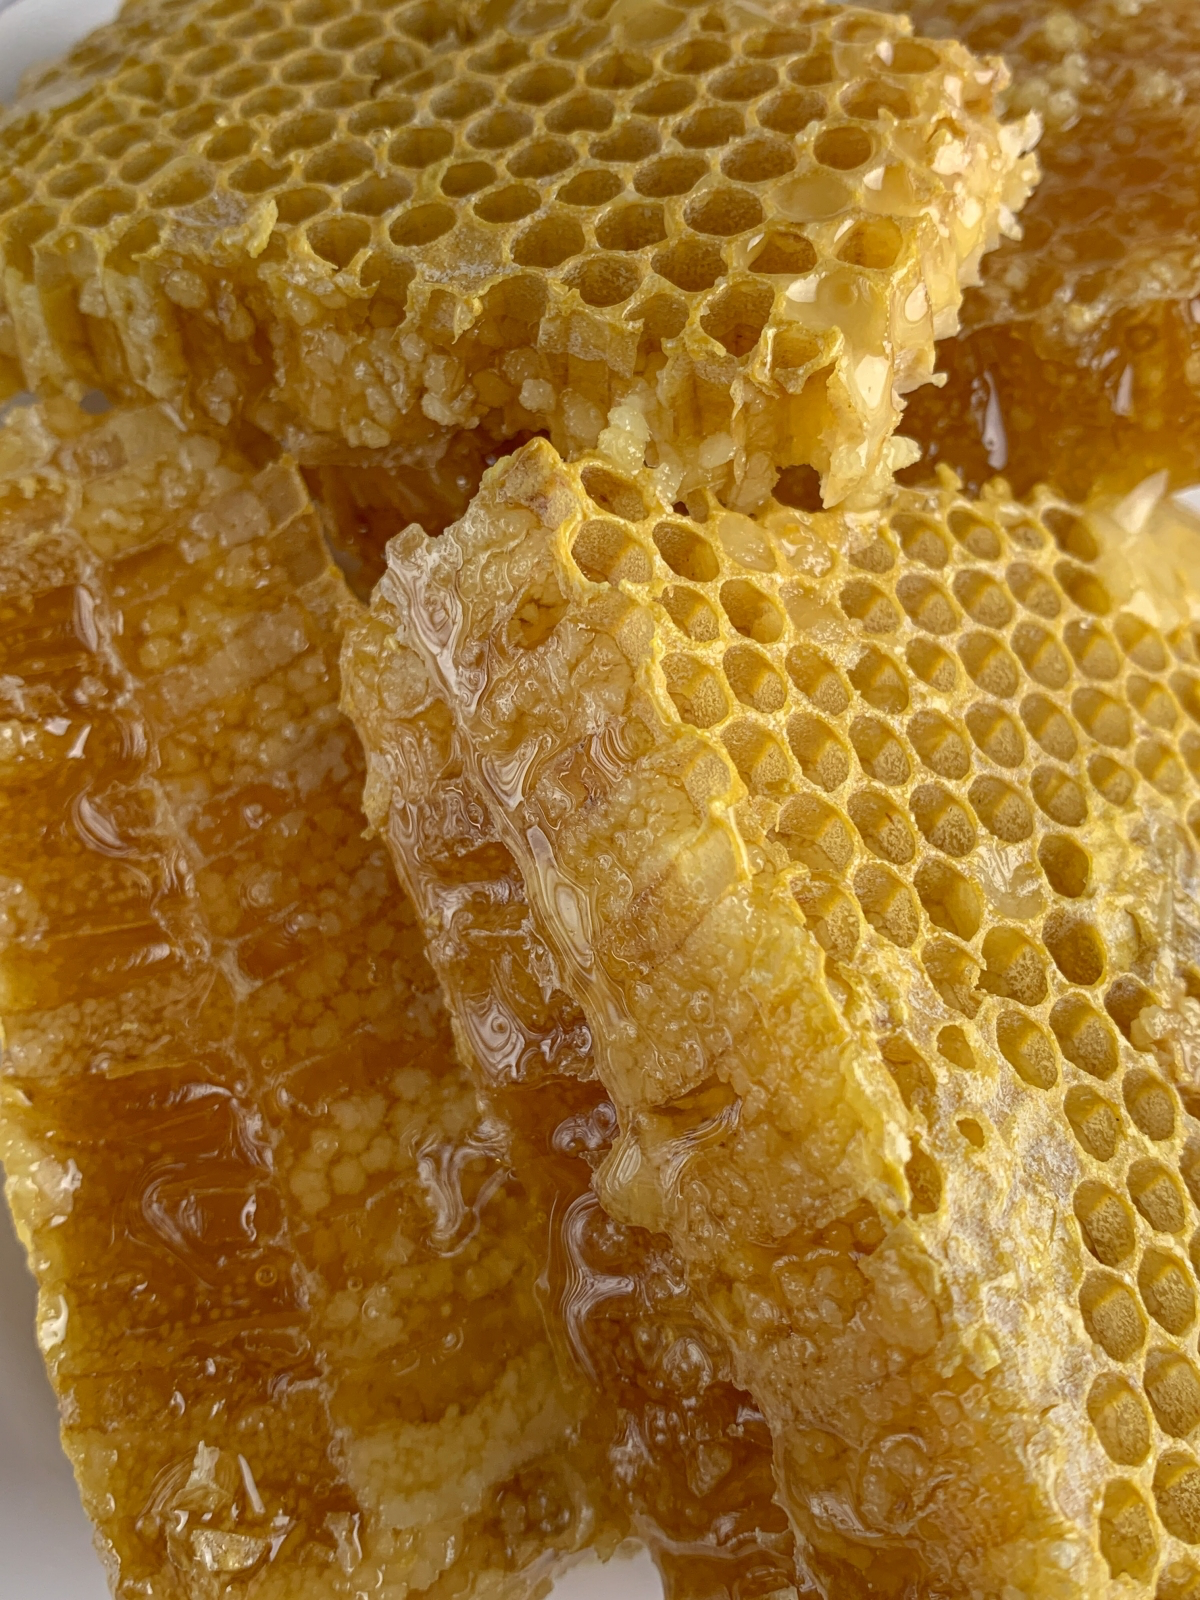 what are the medicinal uses of honey